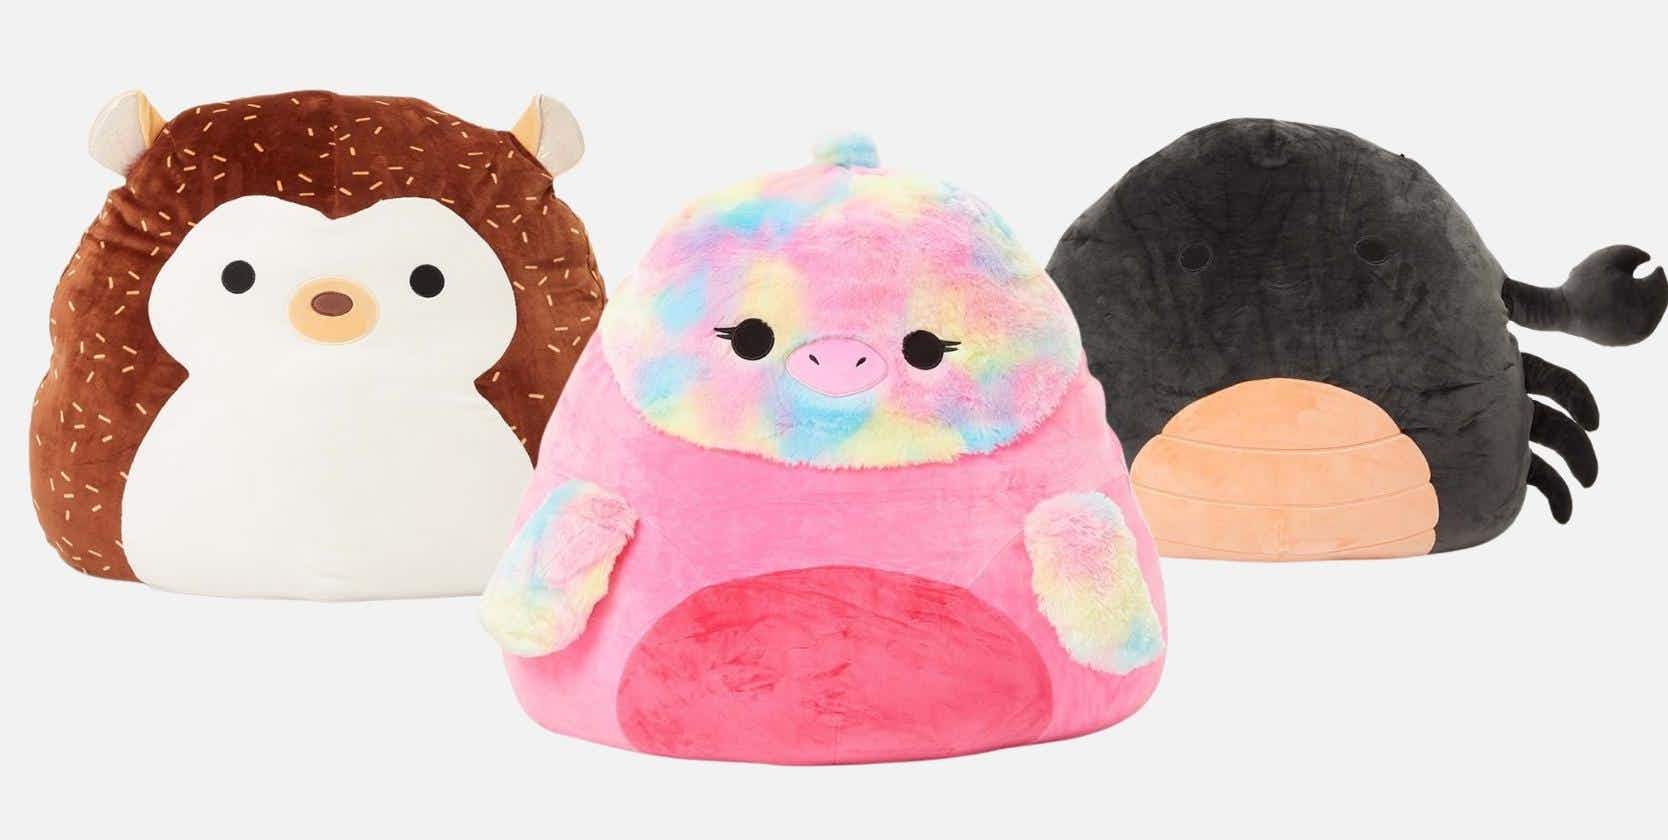 zulily-x-large-squishmallows-2022-1